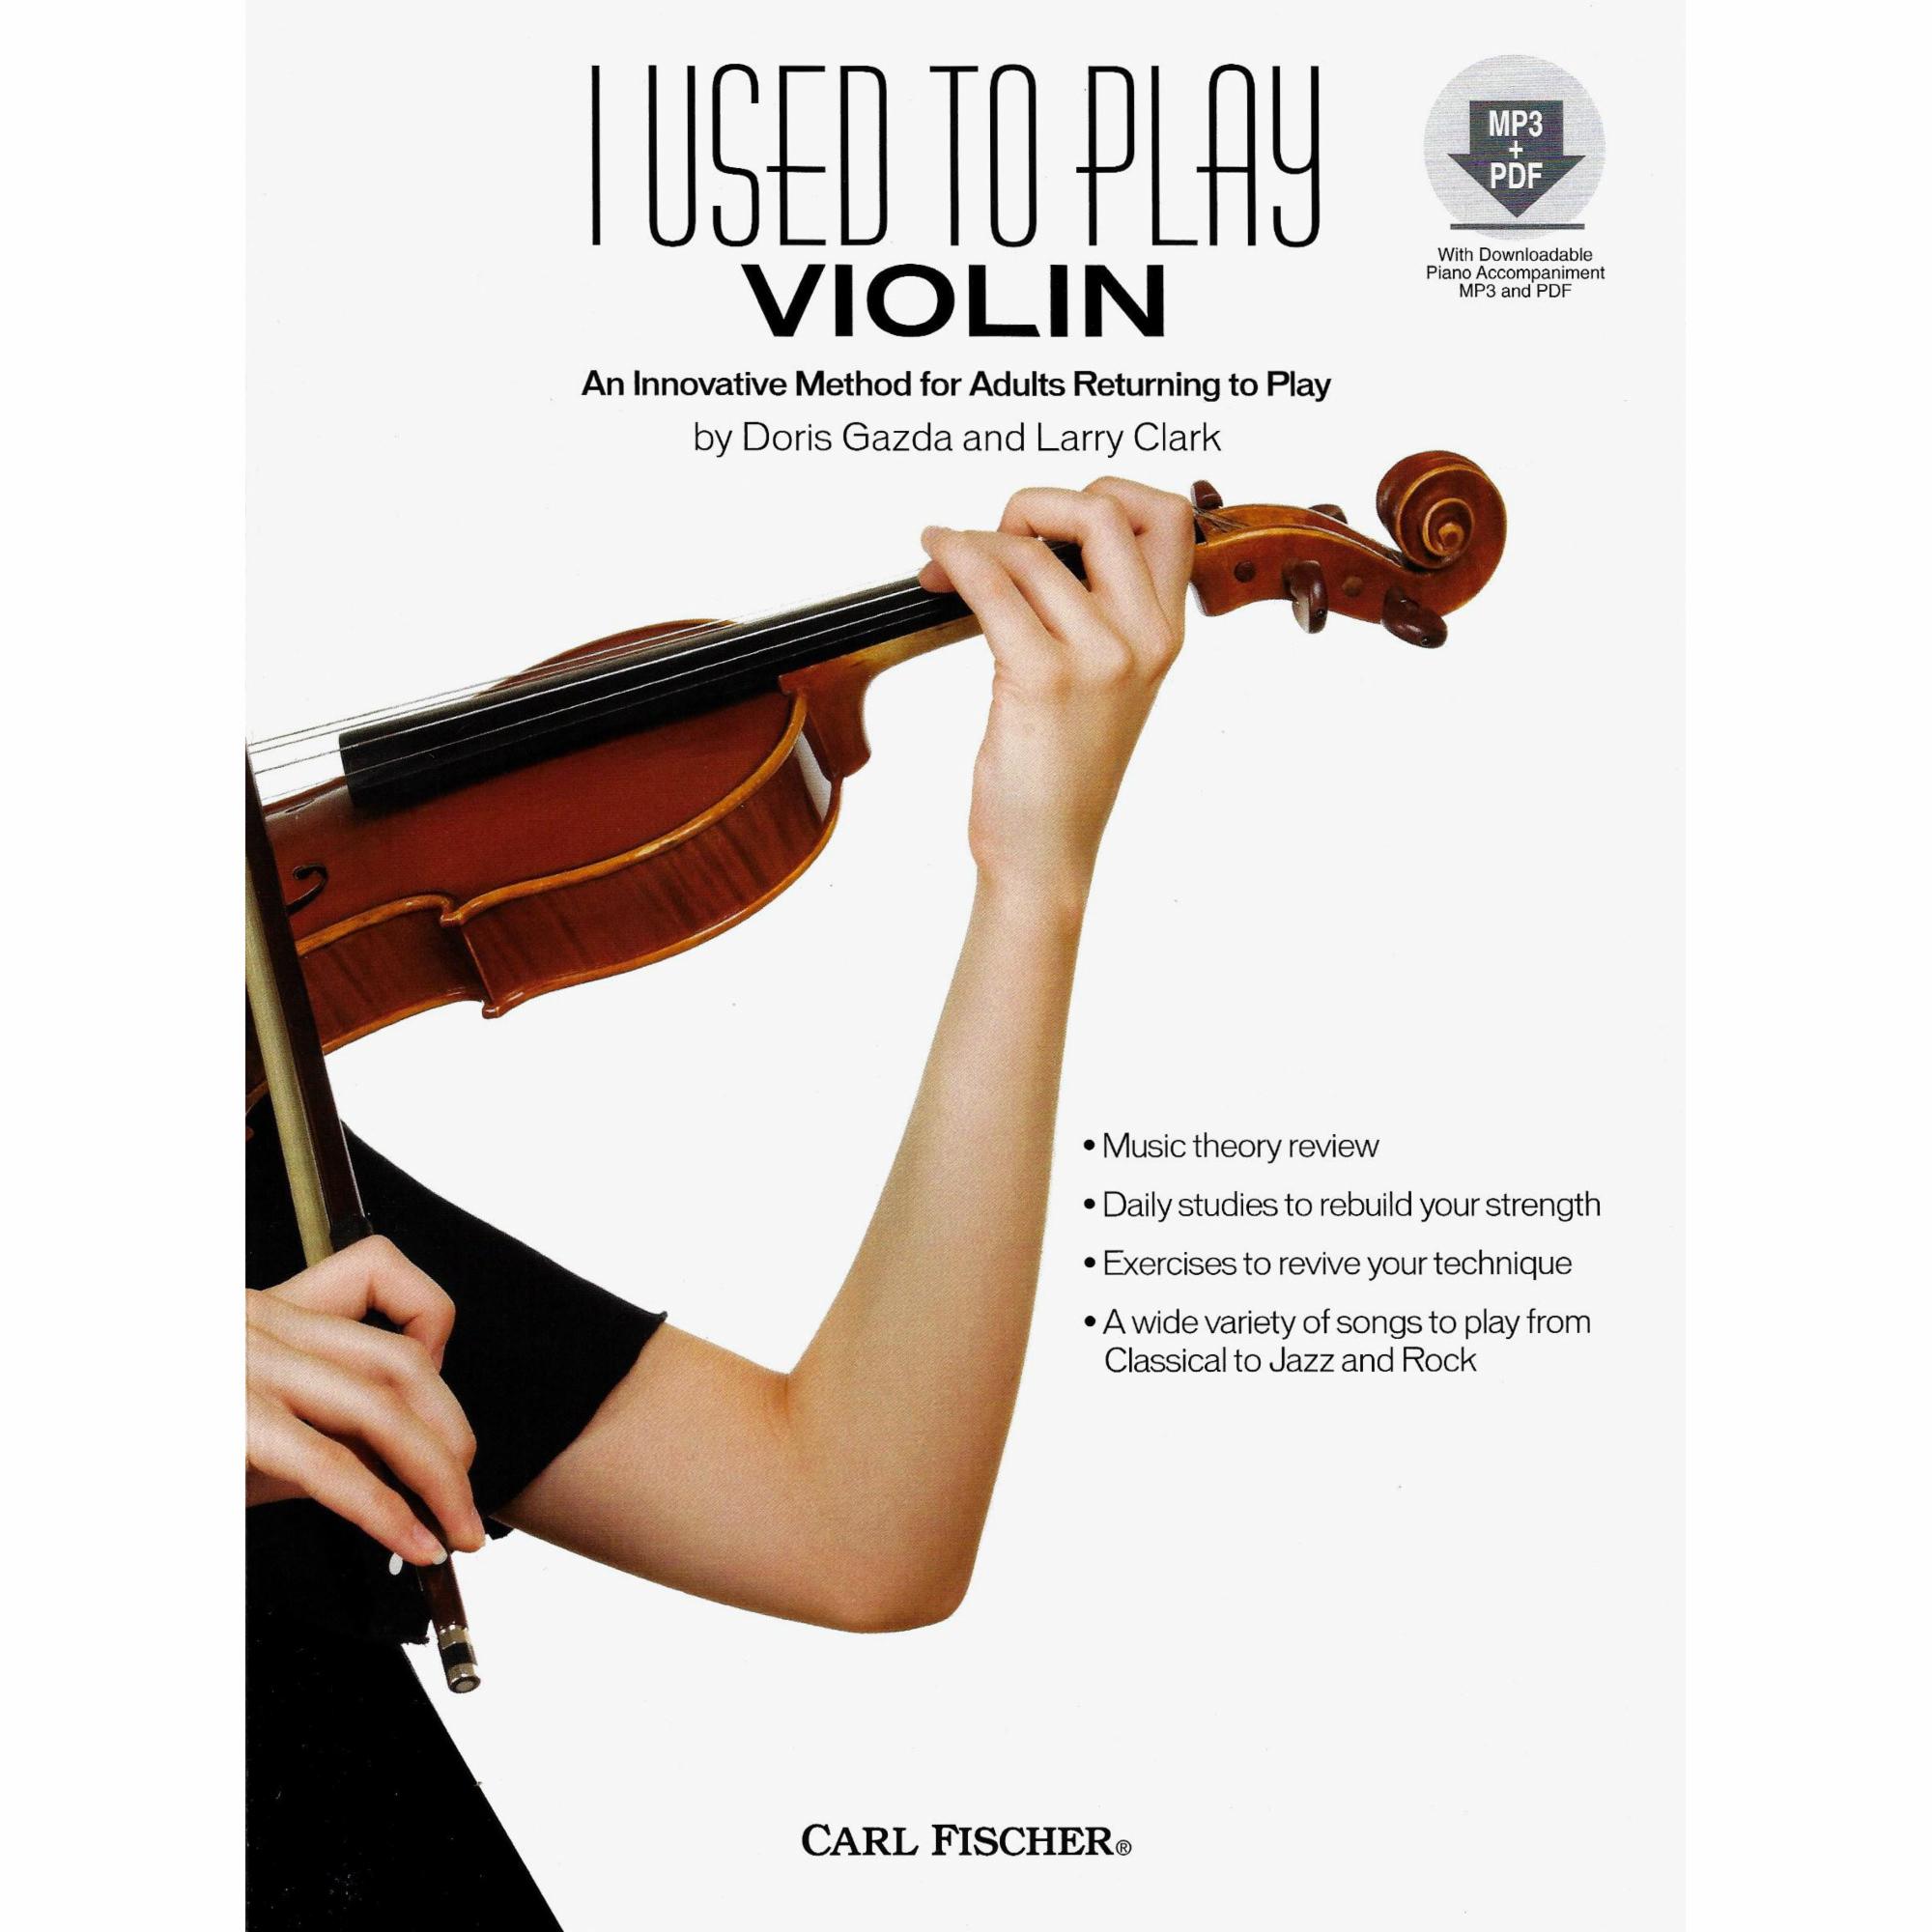 I Used to Play Violin, Viola or Cello